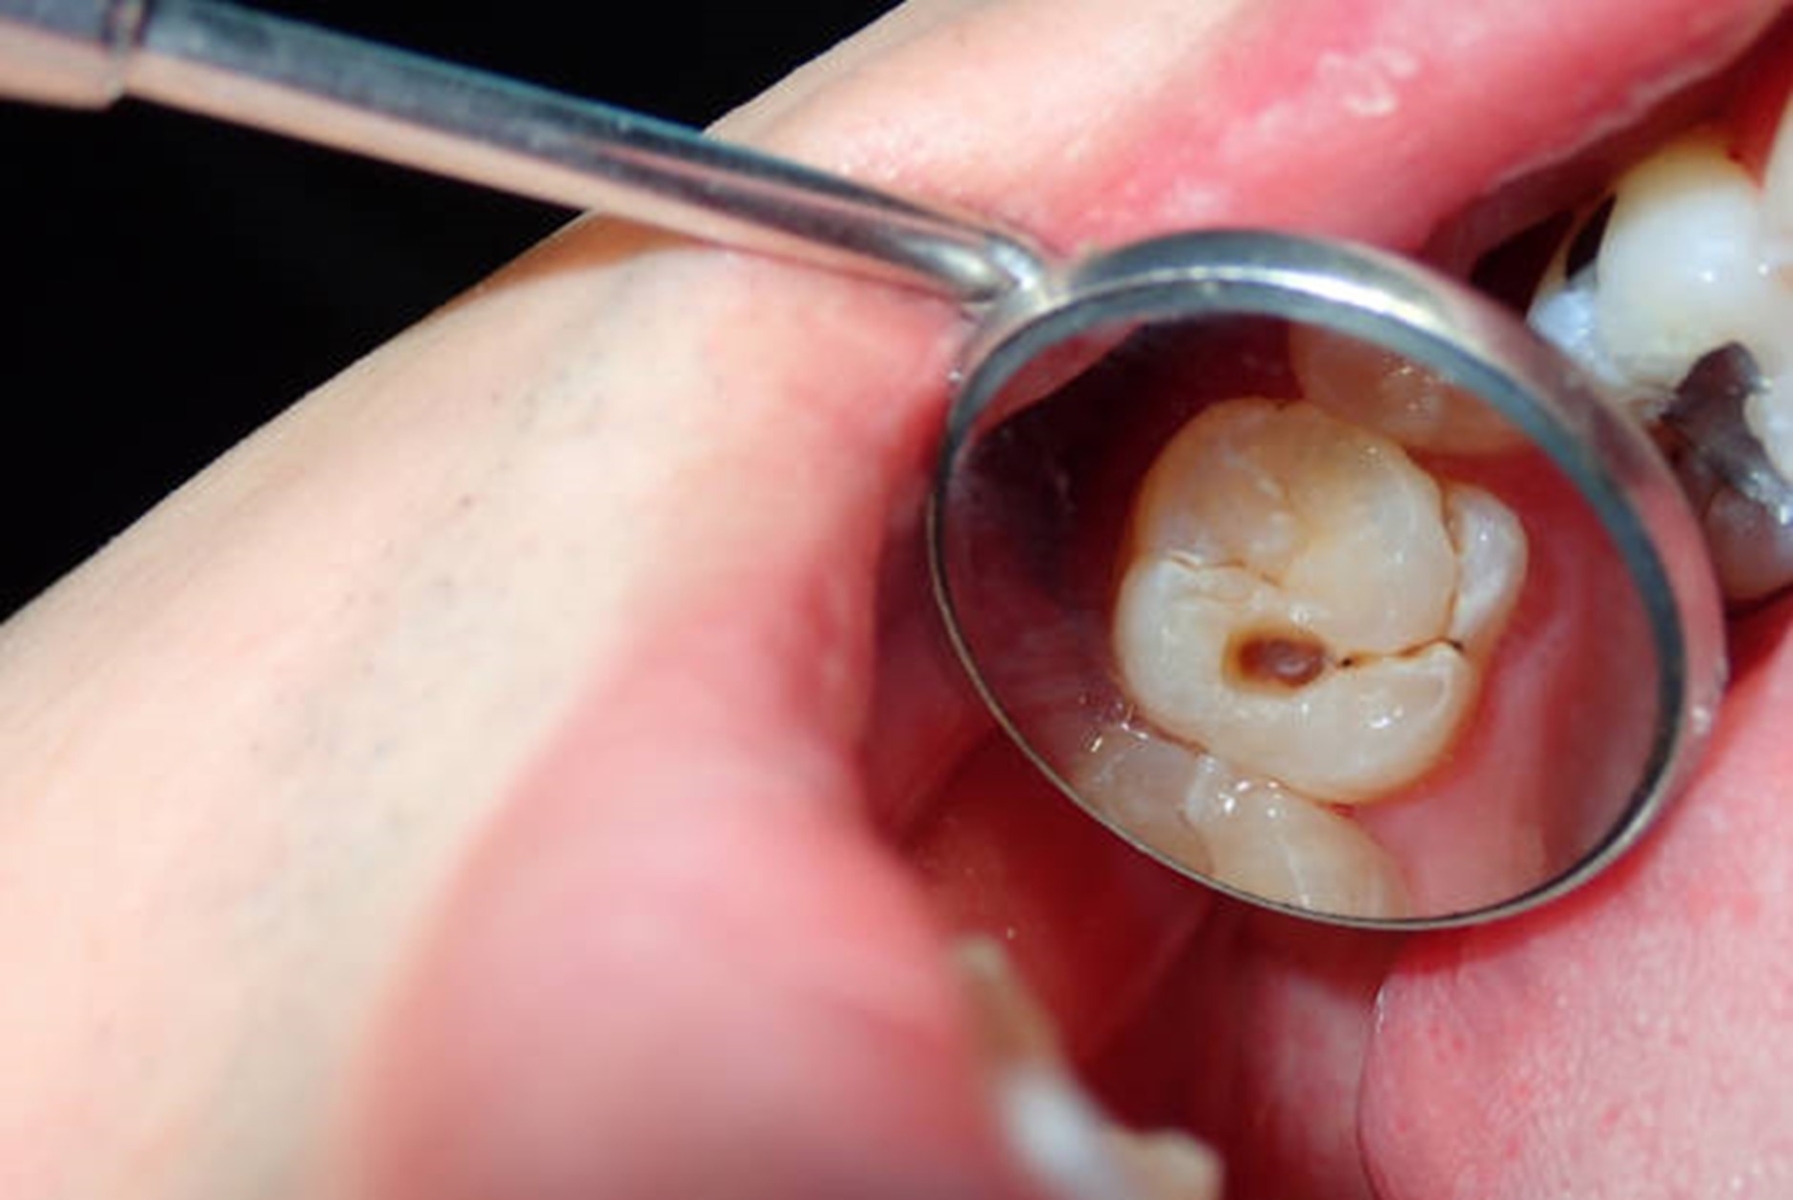 Why Dental Decay Appears Black